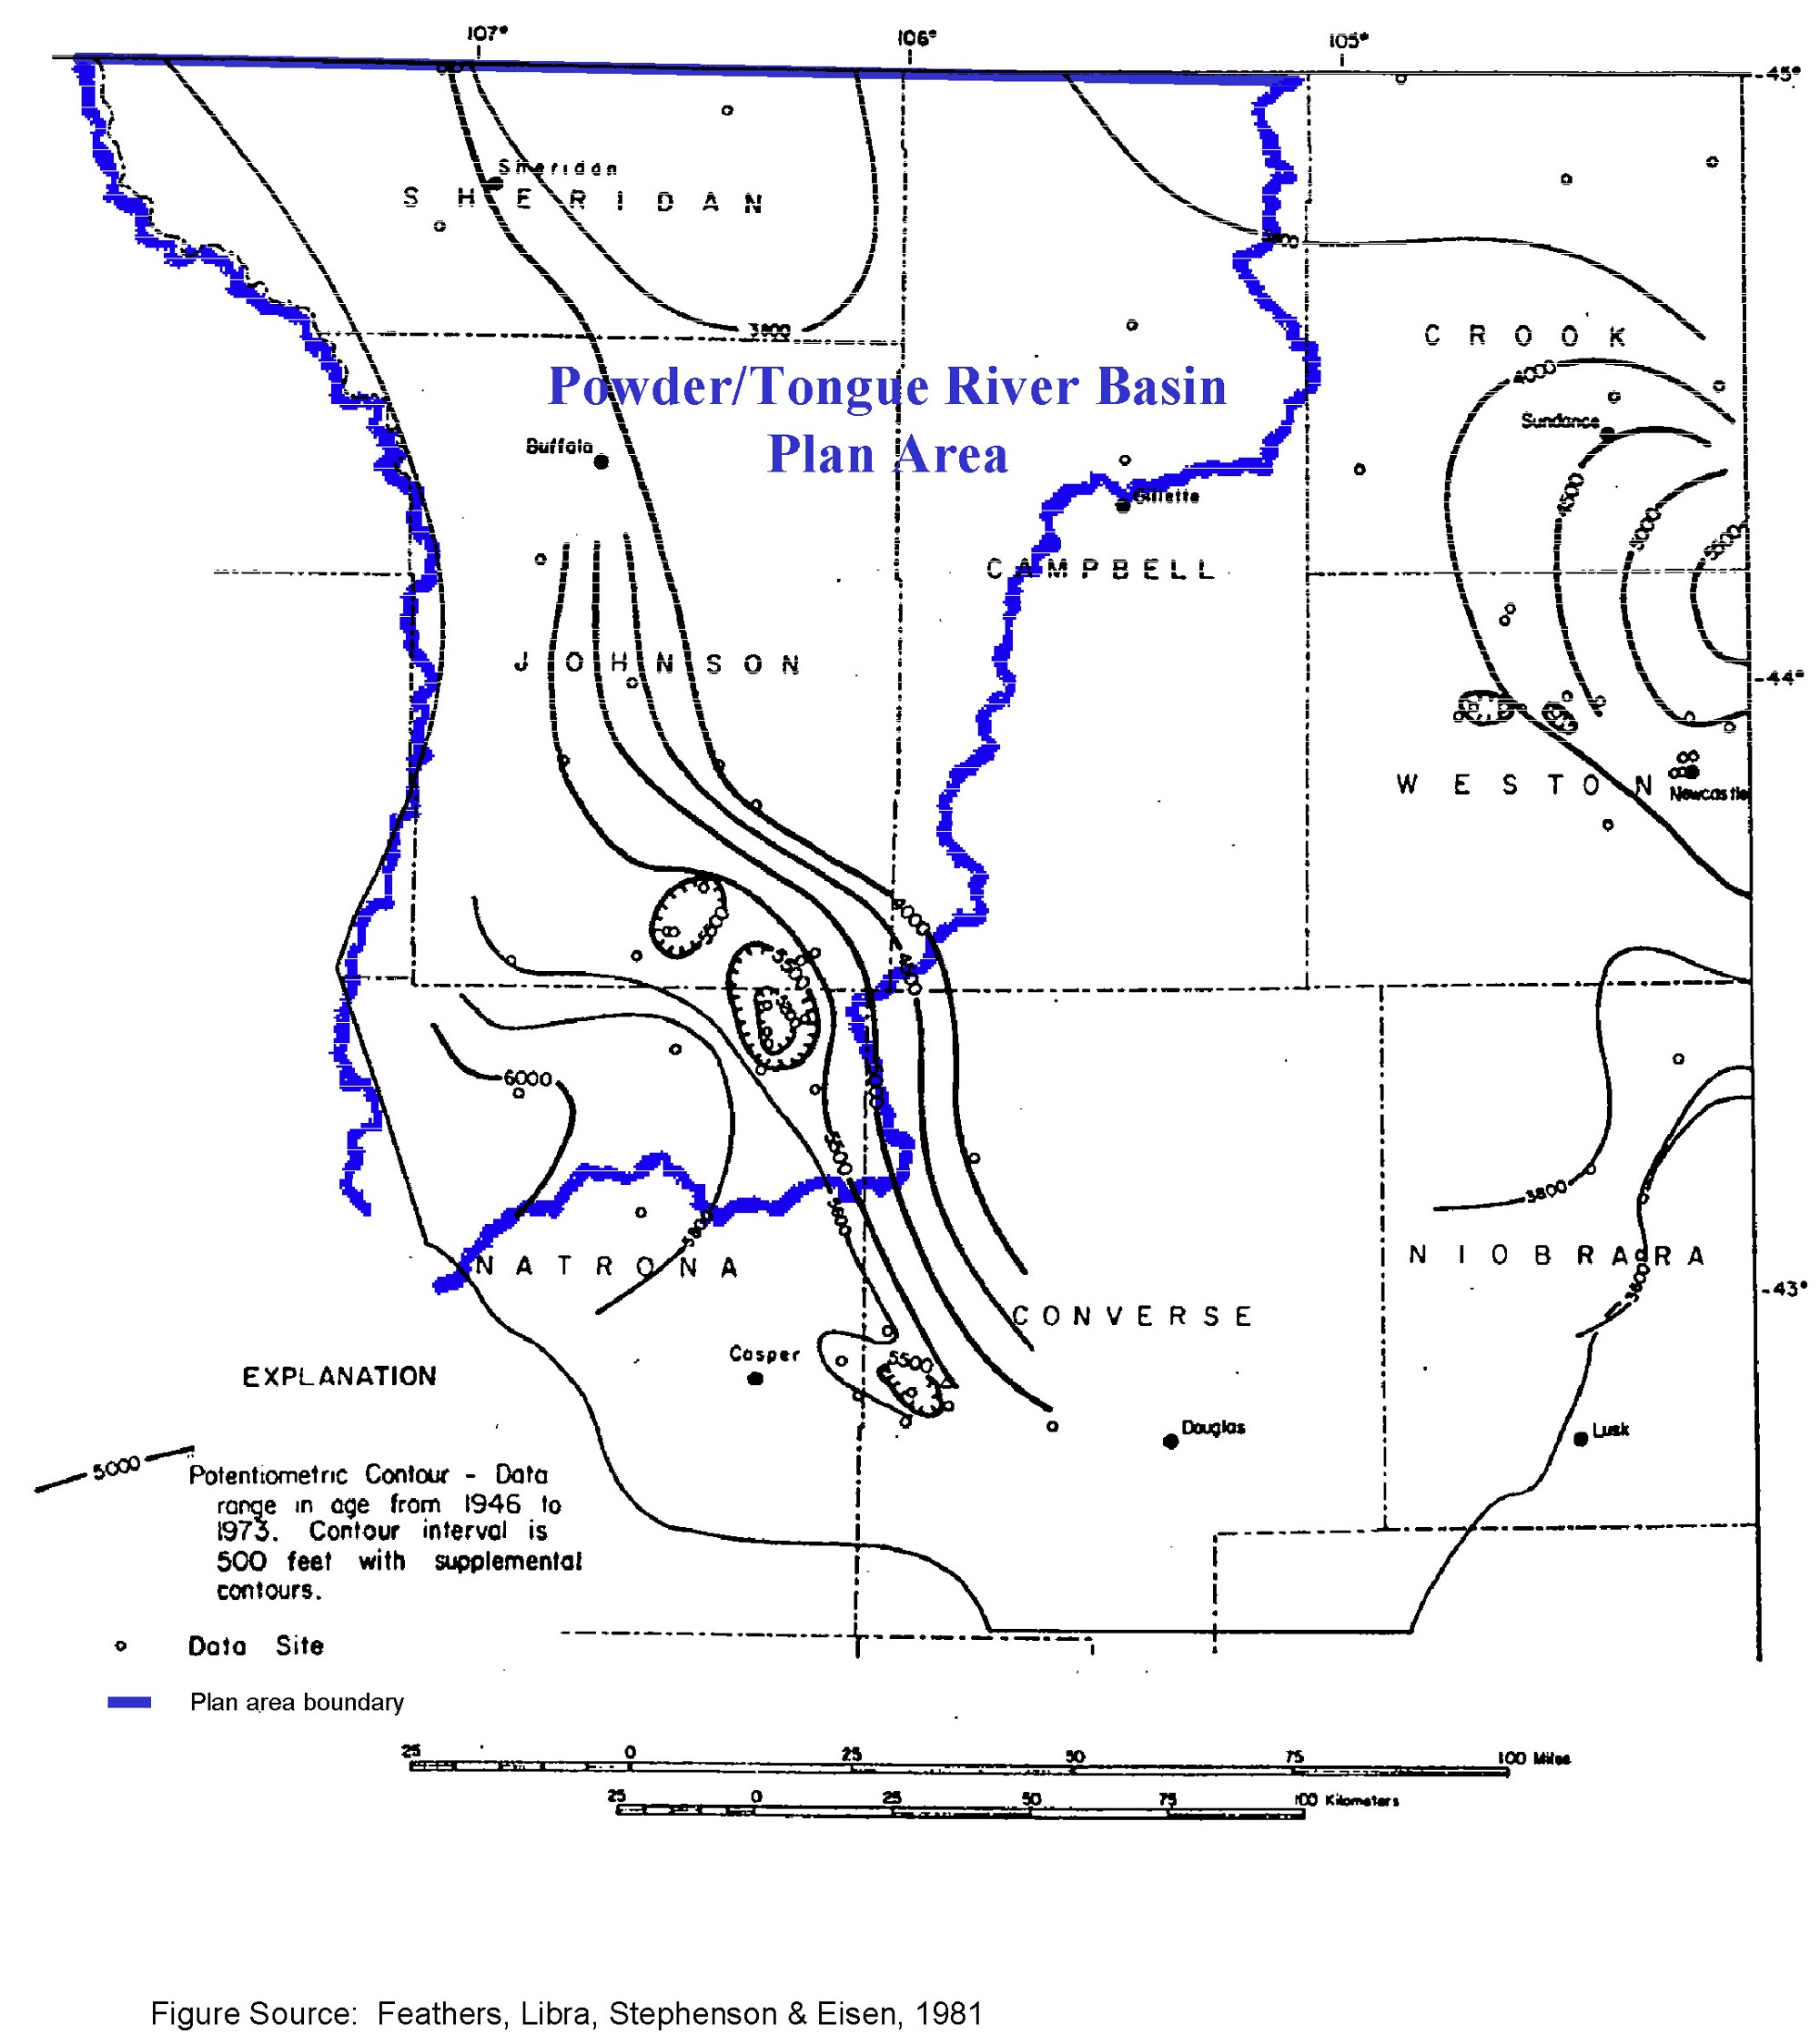 Potentiometric Surface in the Madison Aquifer
(after Swenson and others, 1976